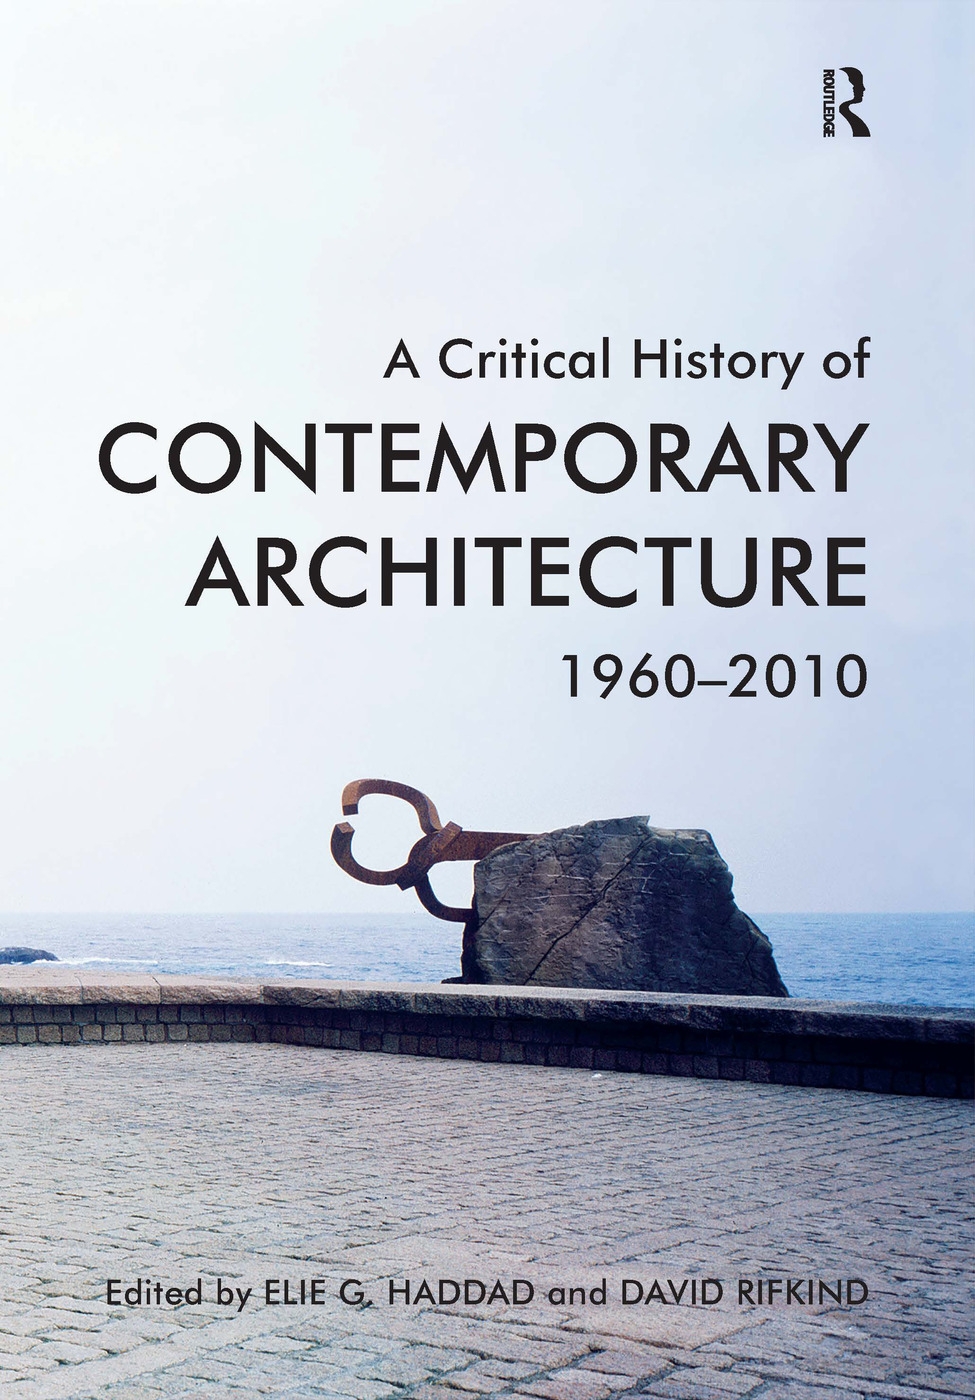 A Critical History of Contemporary Architecture: 1960-2010